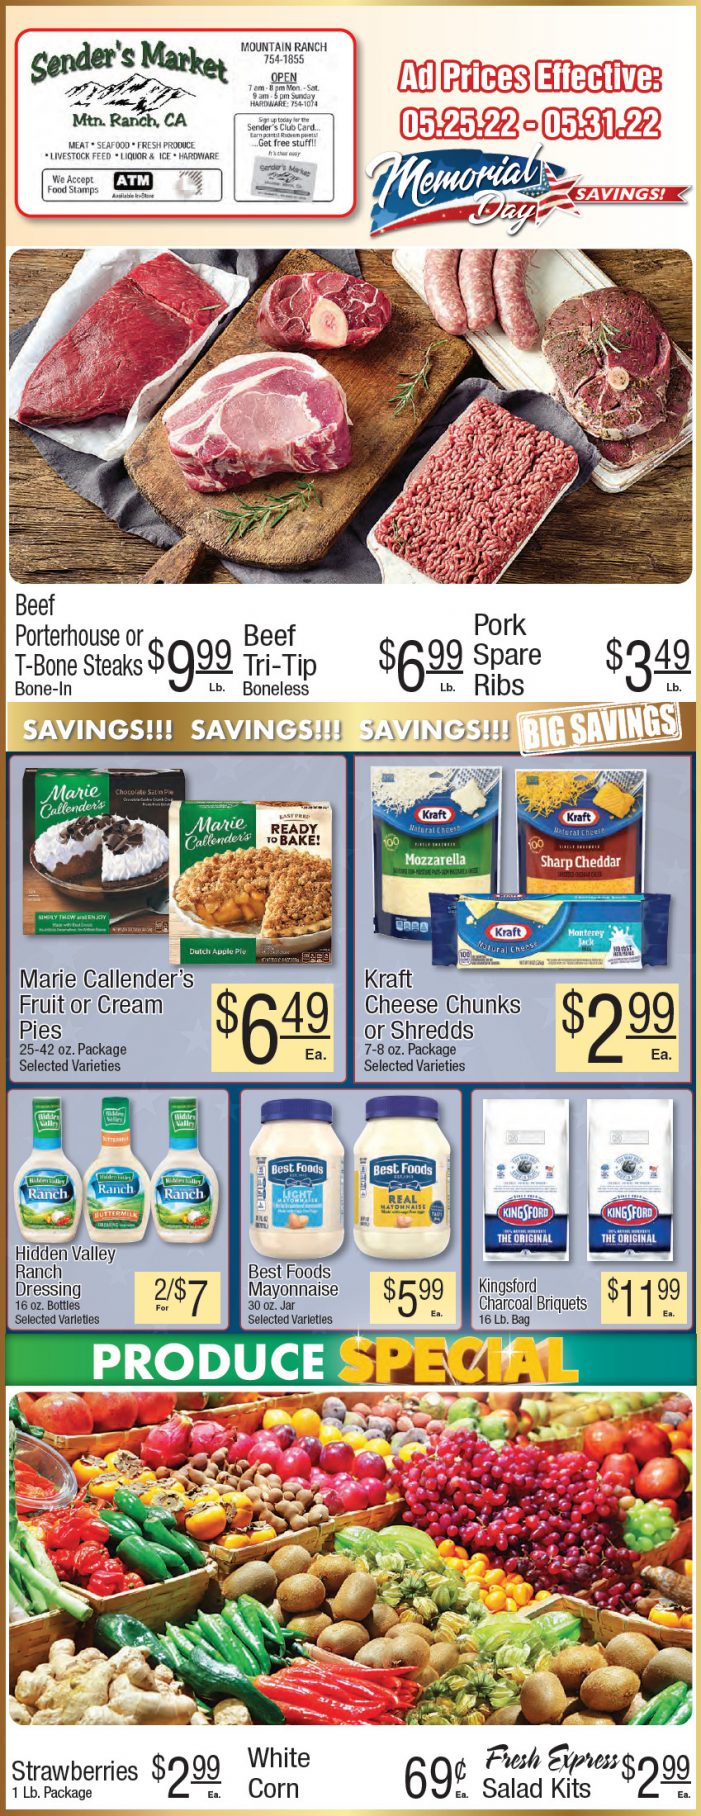 Sender’s Market Weekly Ad & Grocery Specials Through May 31st! Shop Local & Save!